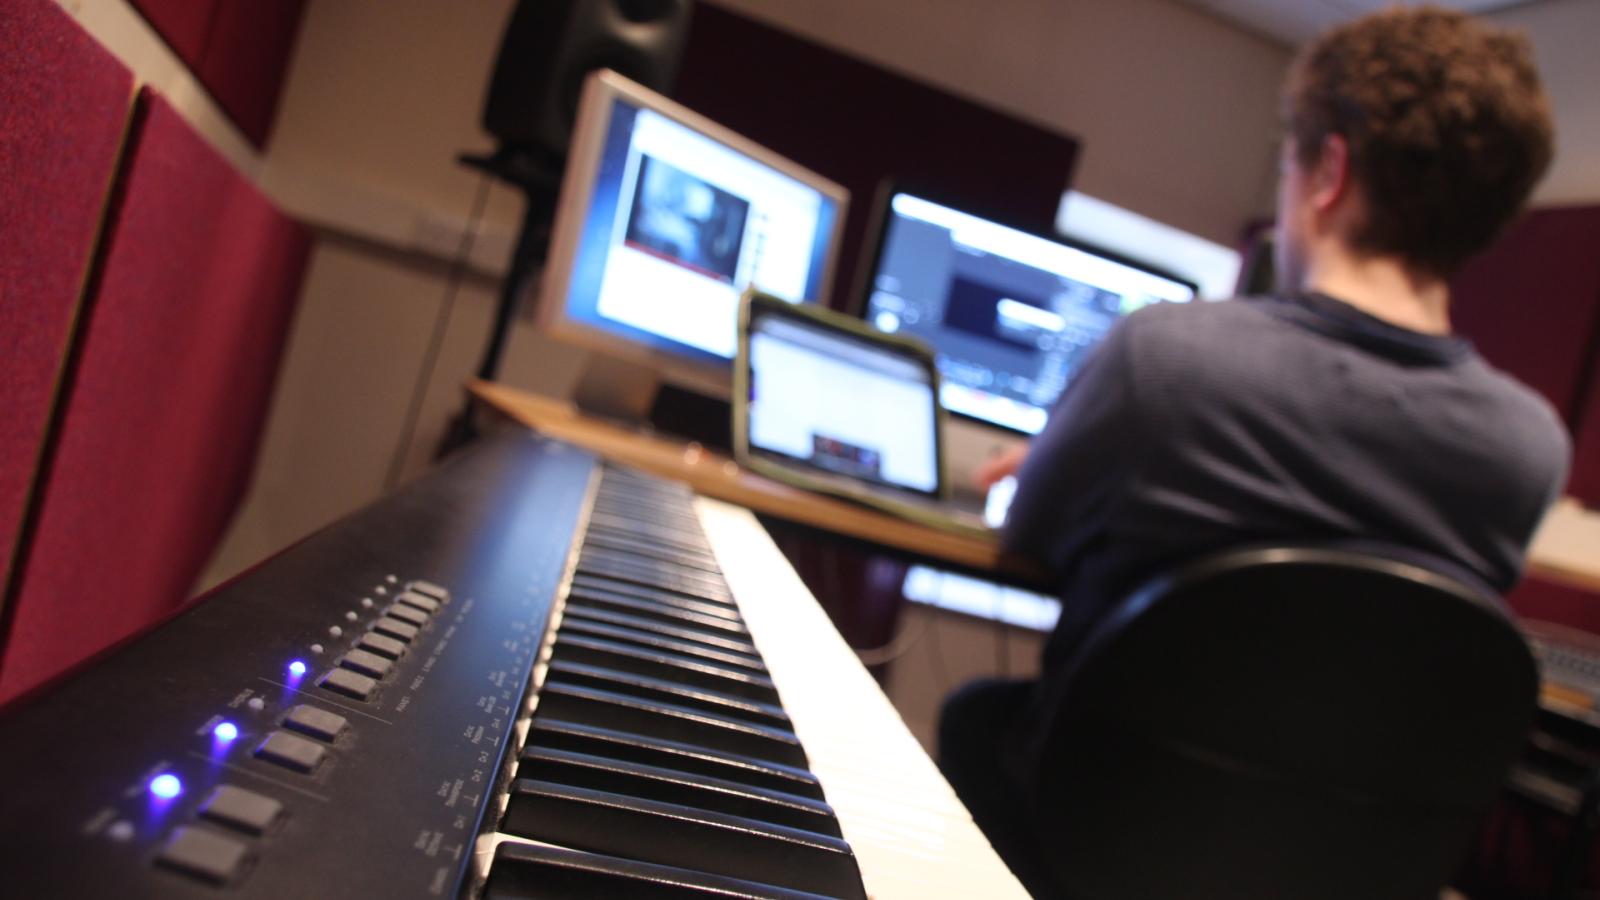 Student working at computer in the background with a close-up of a piano keyboard in the foreground